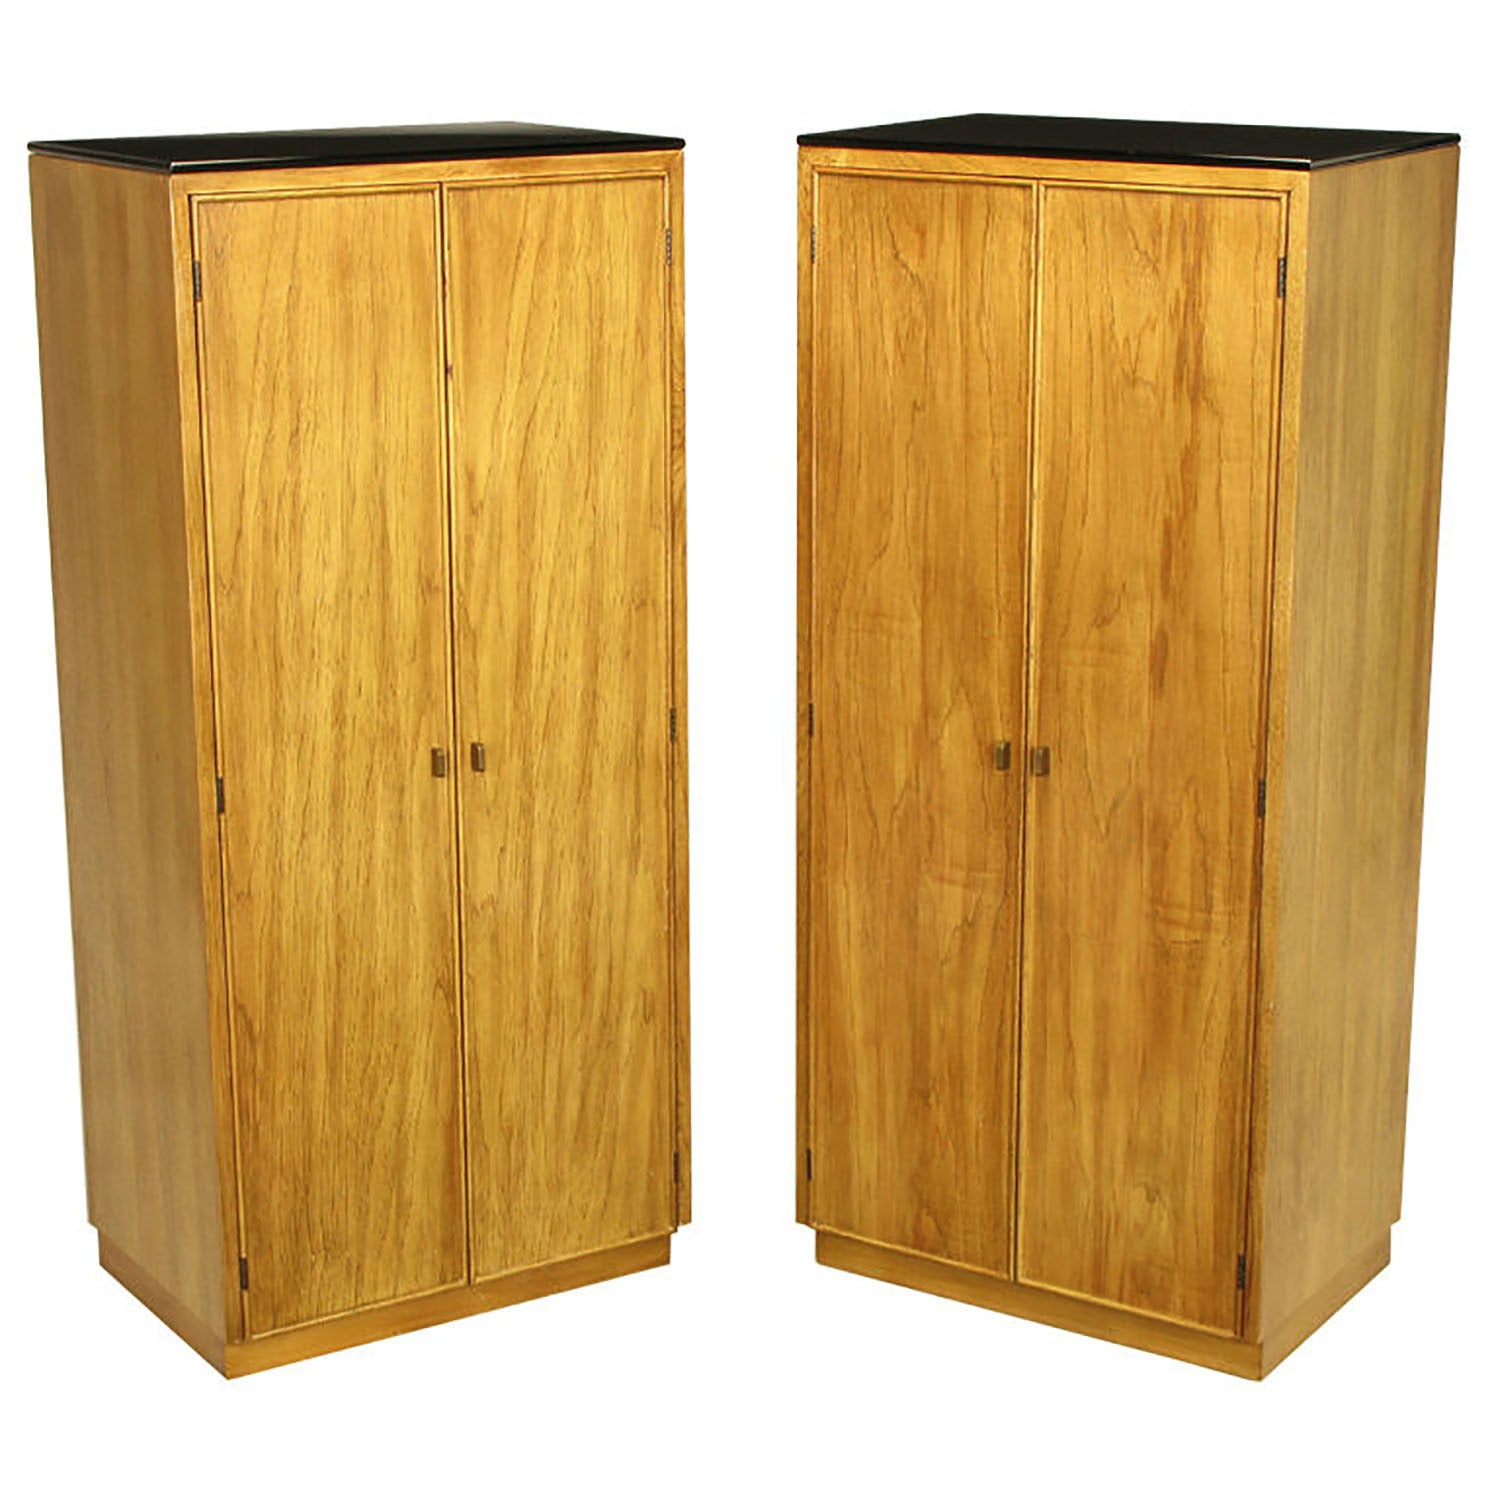 Pair of Ash and Black Glass Narrow and Tall Cabinets